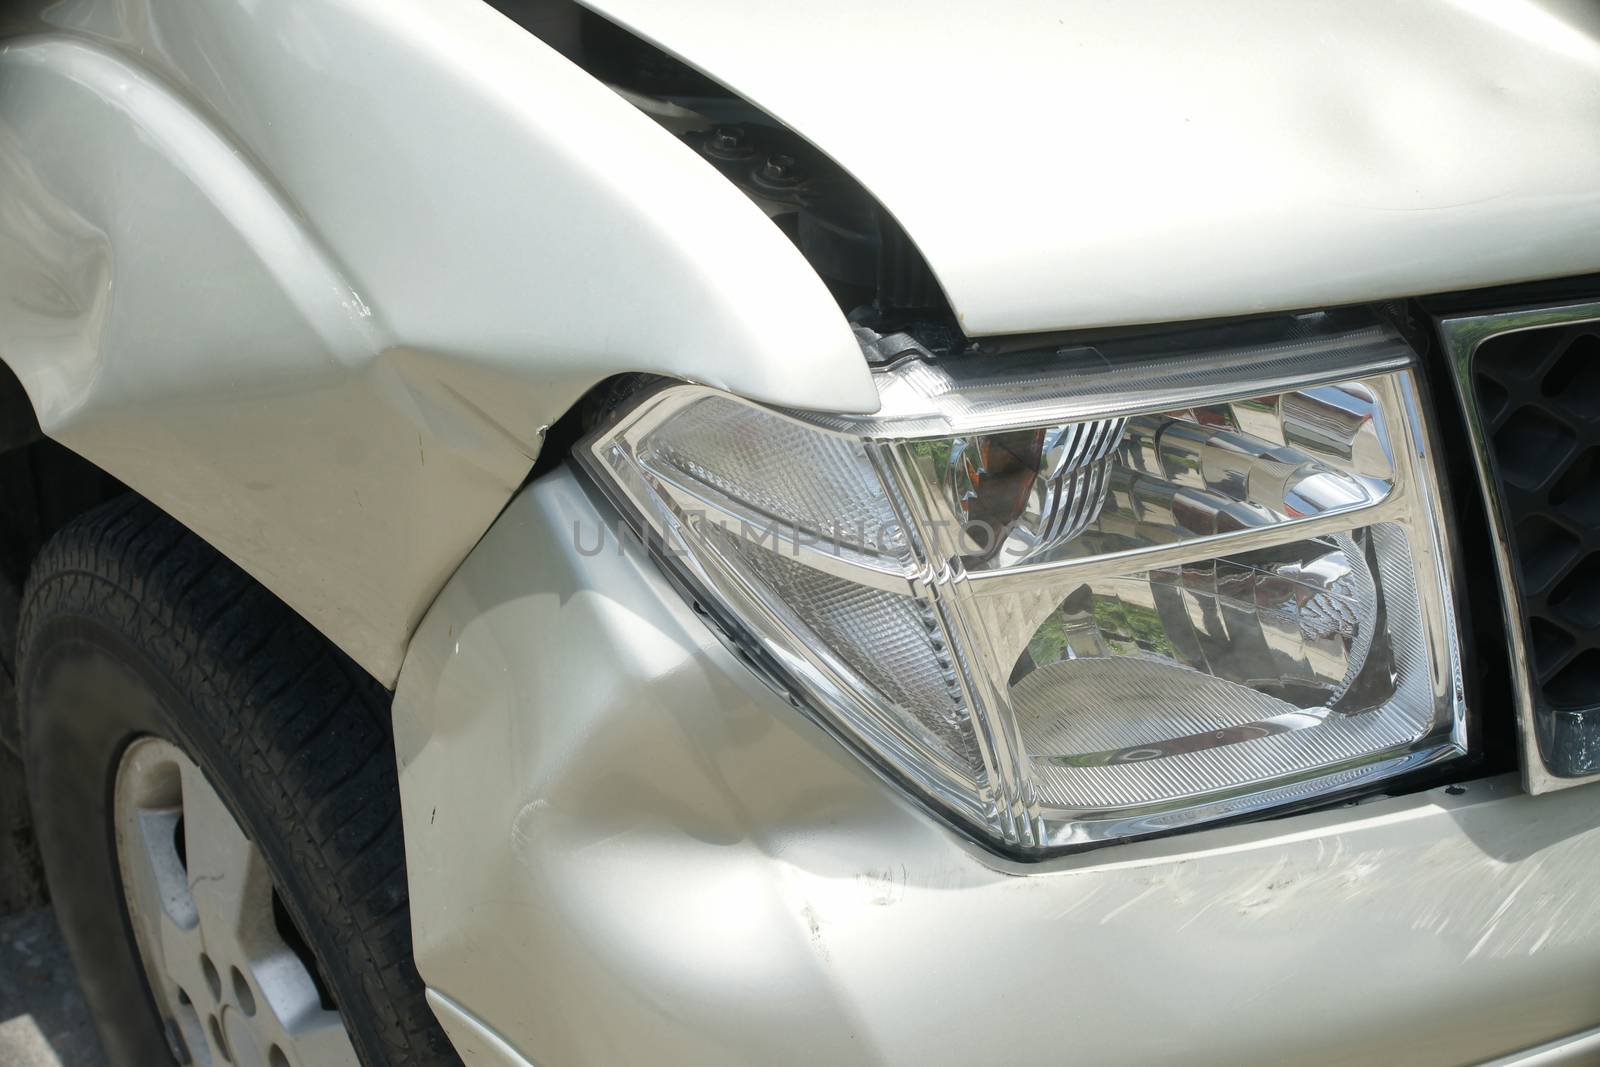 A dent on the right front of a pickup truck (damage from crash accident)